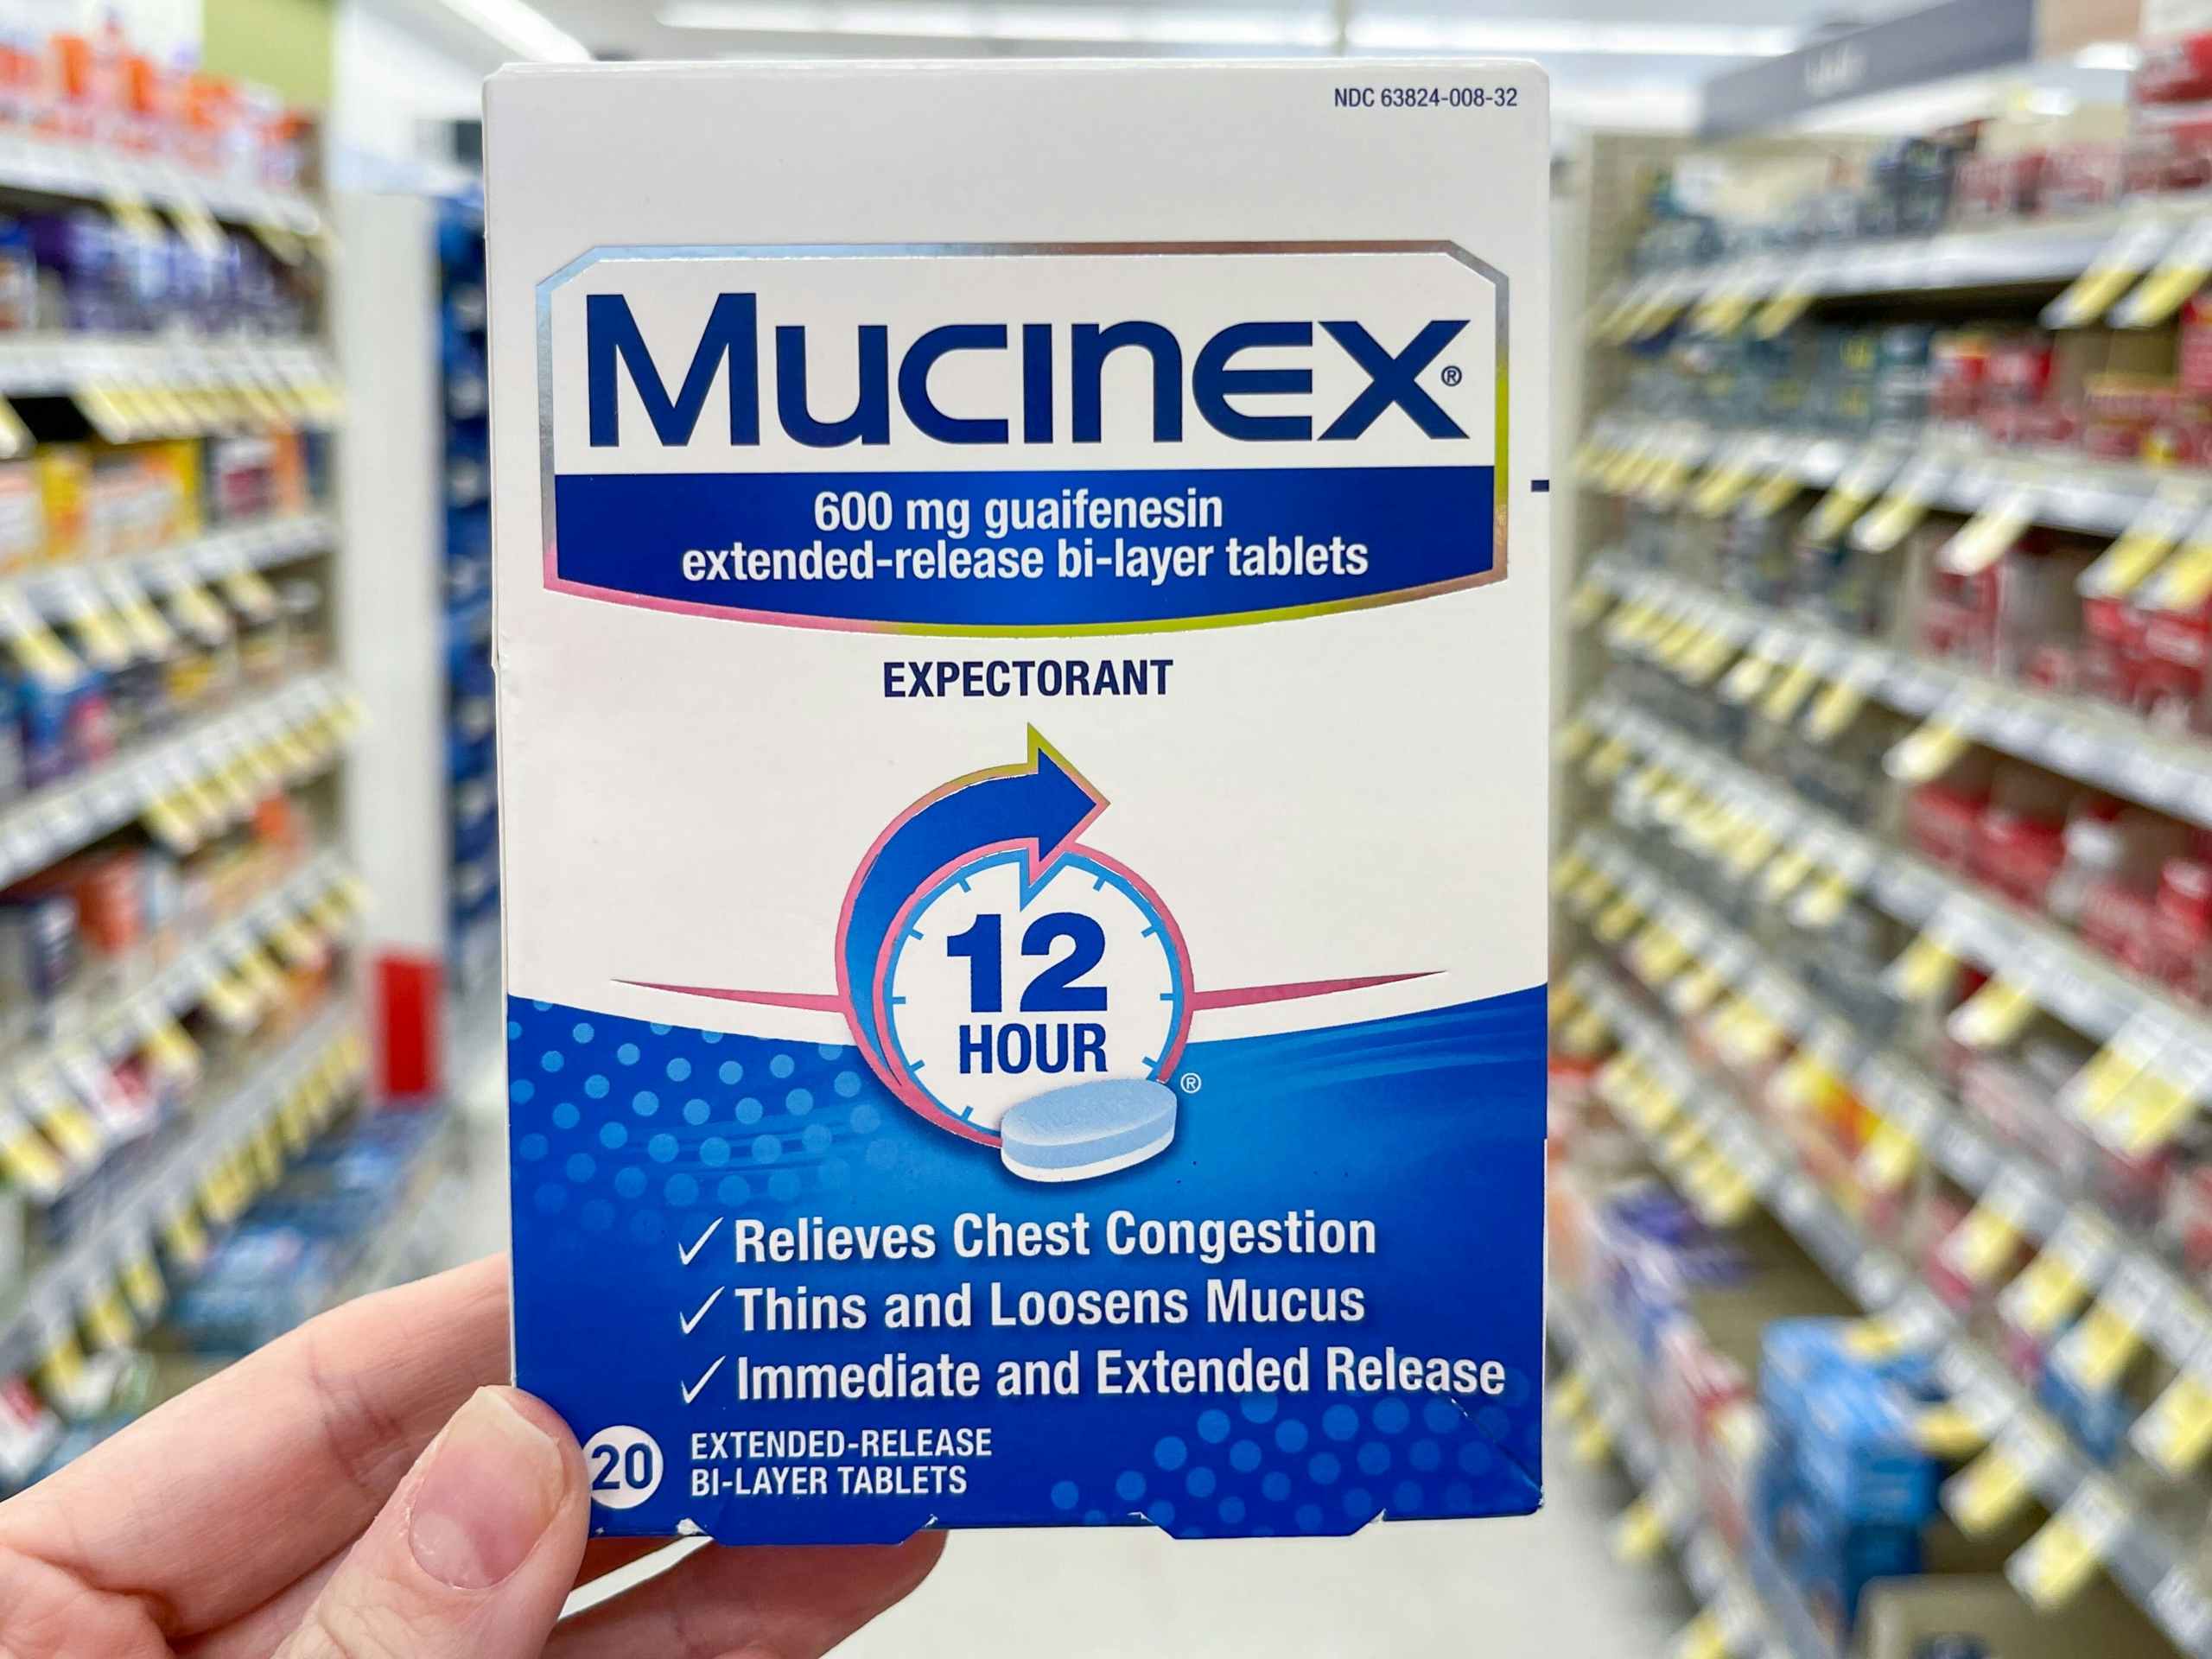 A box of Mucinex Extended Release tablets held out by hand in front of a store aisle.